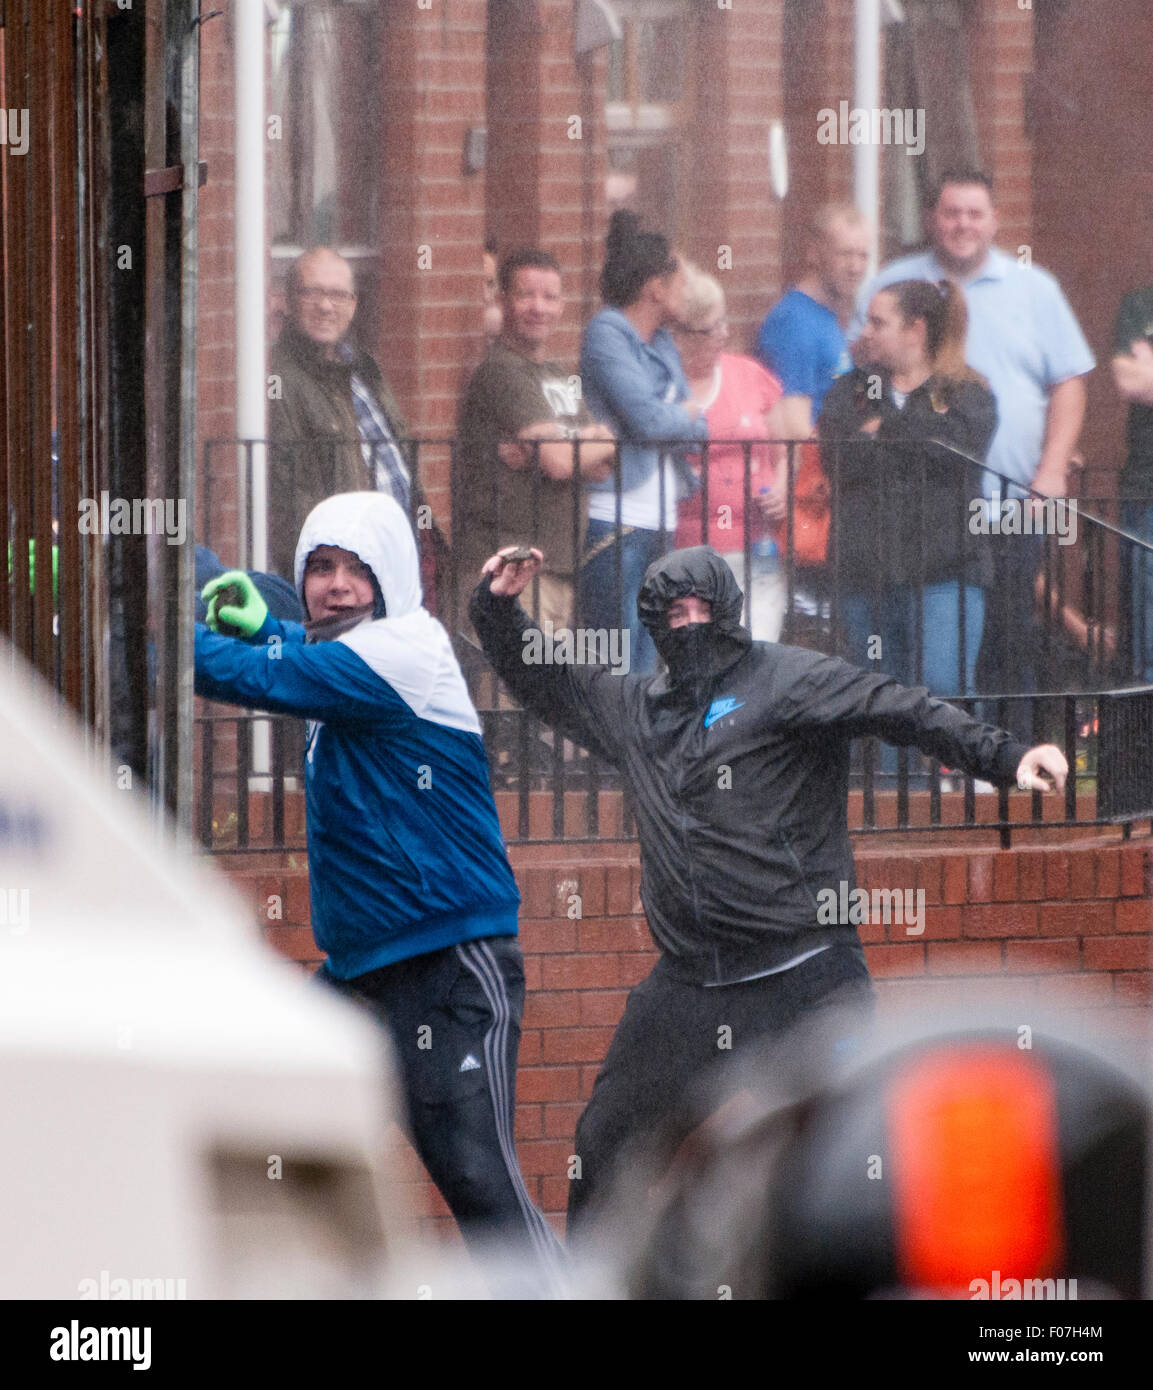 Belfast, Northern Ireland. 09 Aug 2015 - Two nationalist youths, throw stones at PSNI officers following an anti-internment rally. Credit:  Stephen Barnes/Alamy Live News Stock Photo